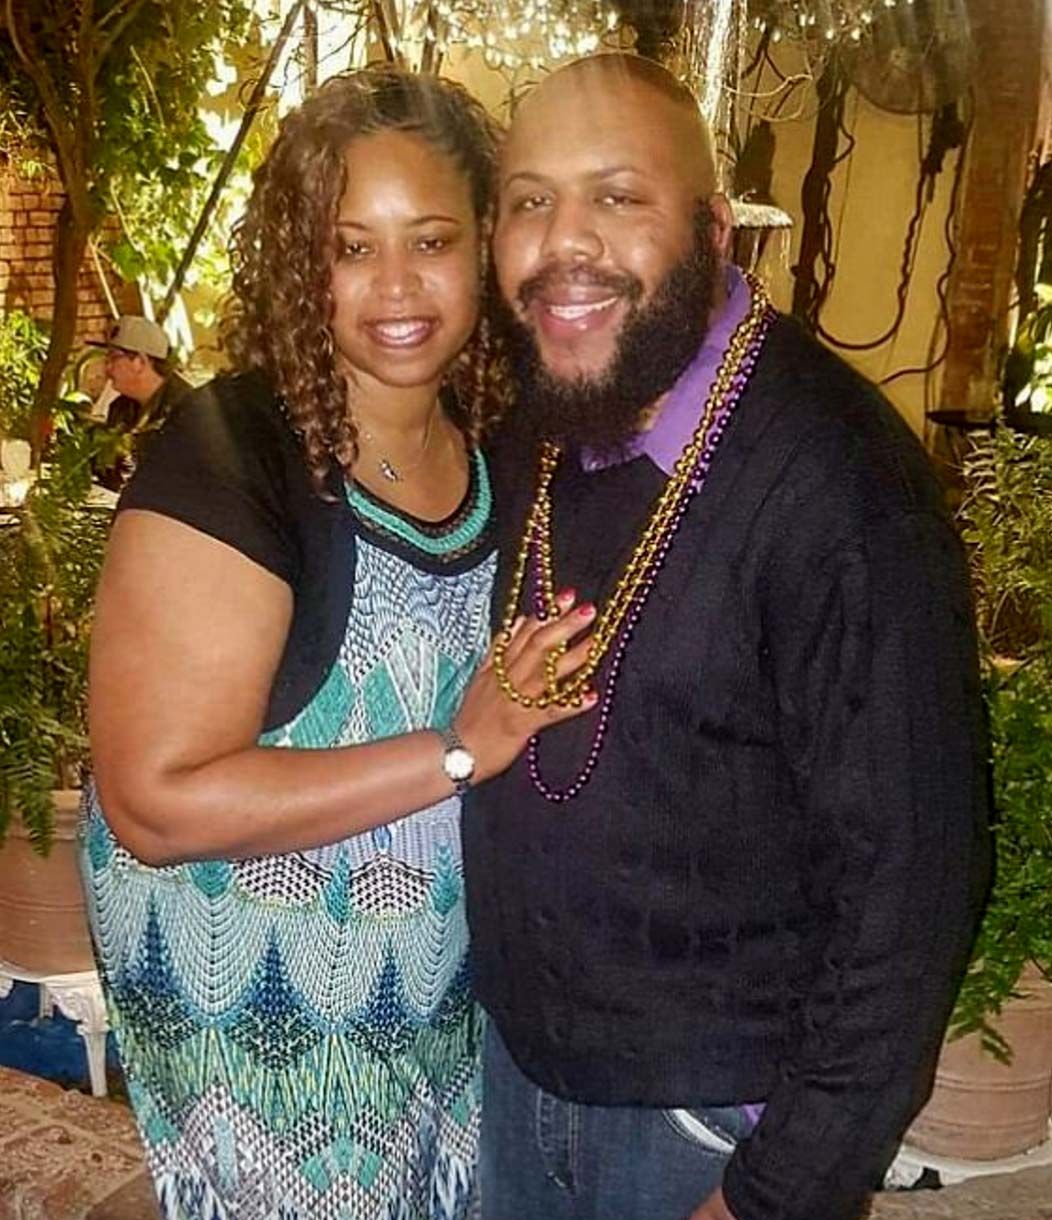 Steve Stephens Ex-Girlfriend Speaks Out for the First Time and Says Im So Sorry All of This Has Happened News pic